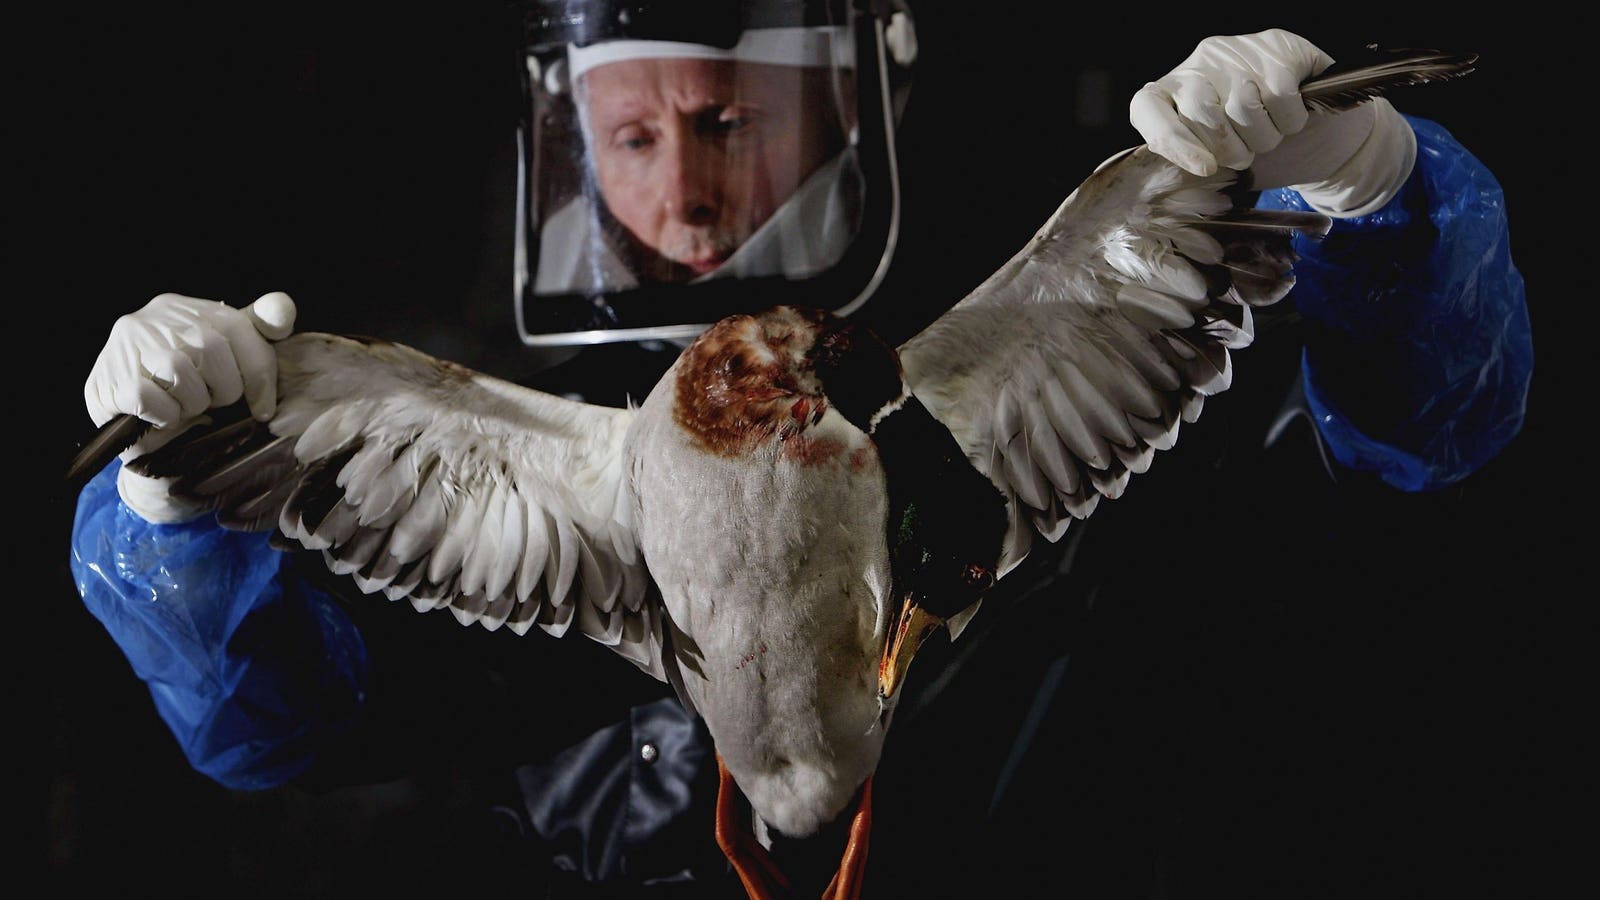 Here’s Why Masking And Other Safety Measures Could Return If A Bird Flu Pandemic Is Declared